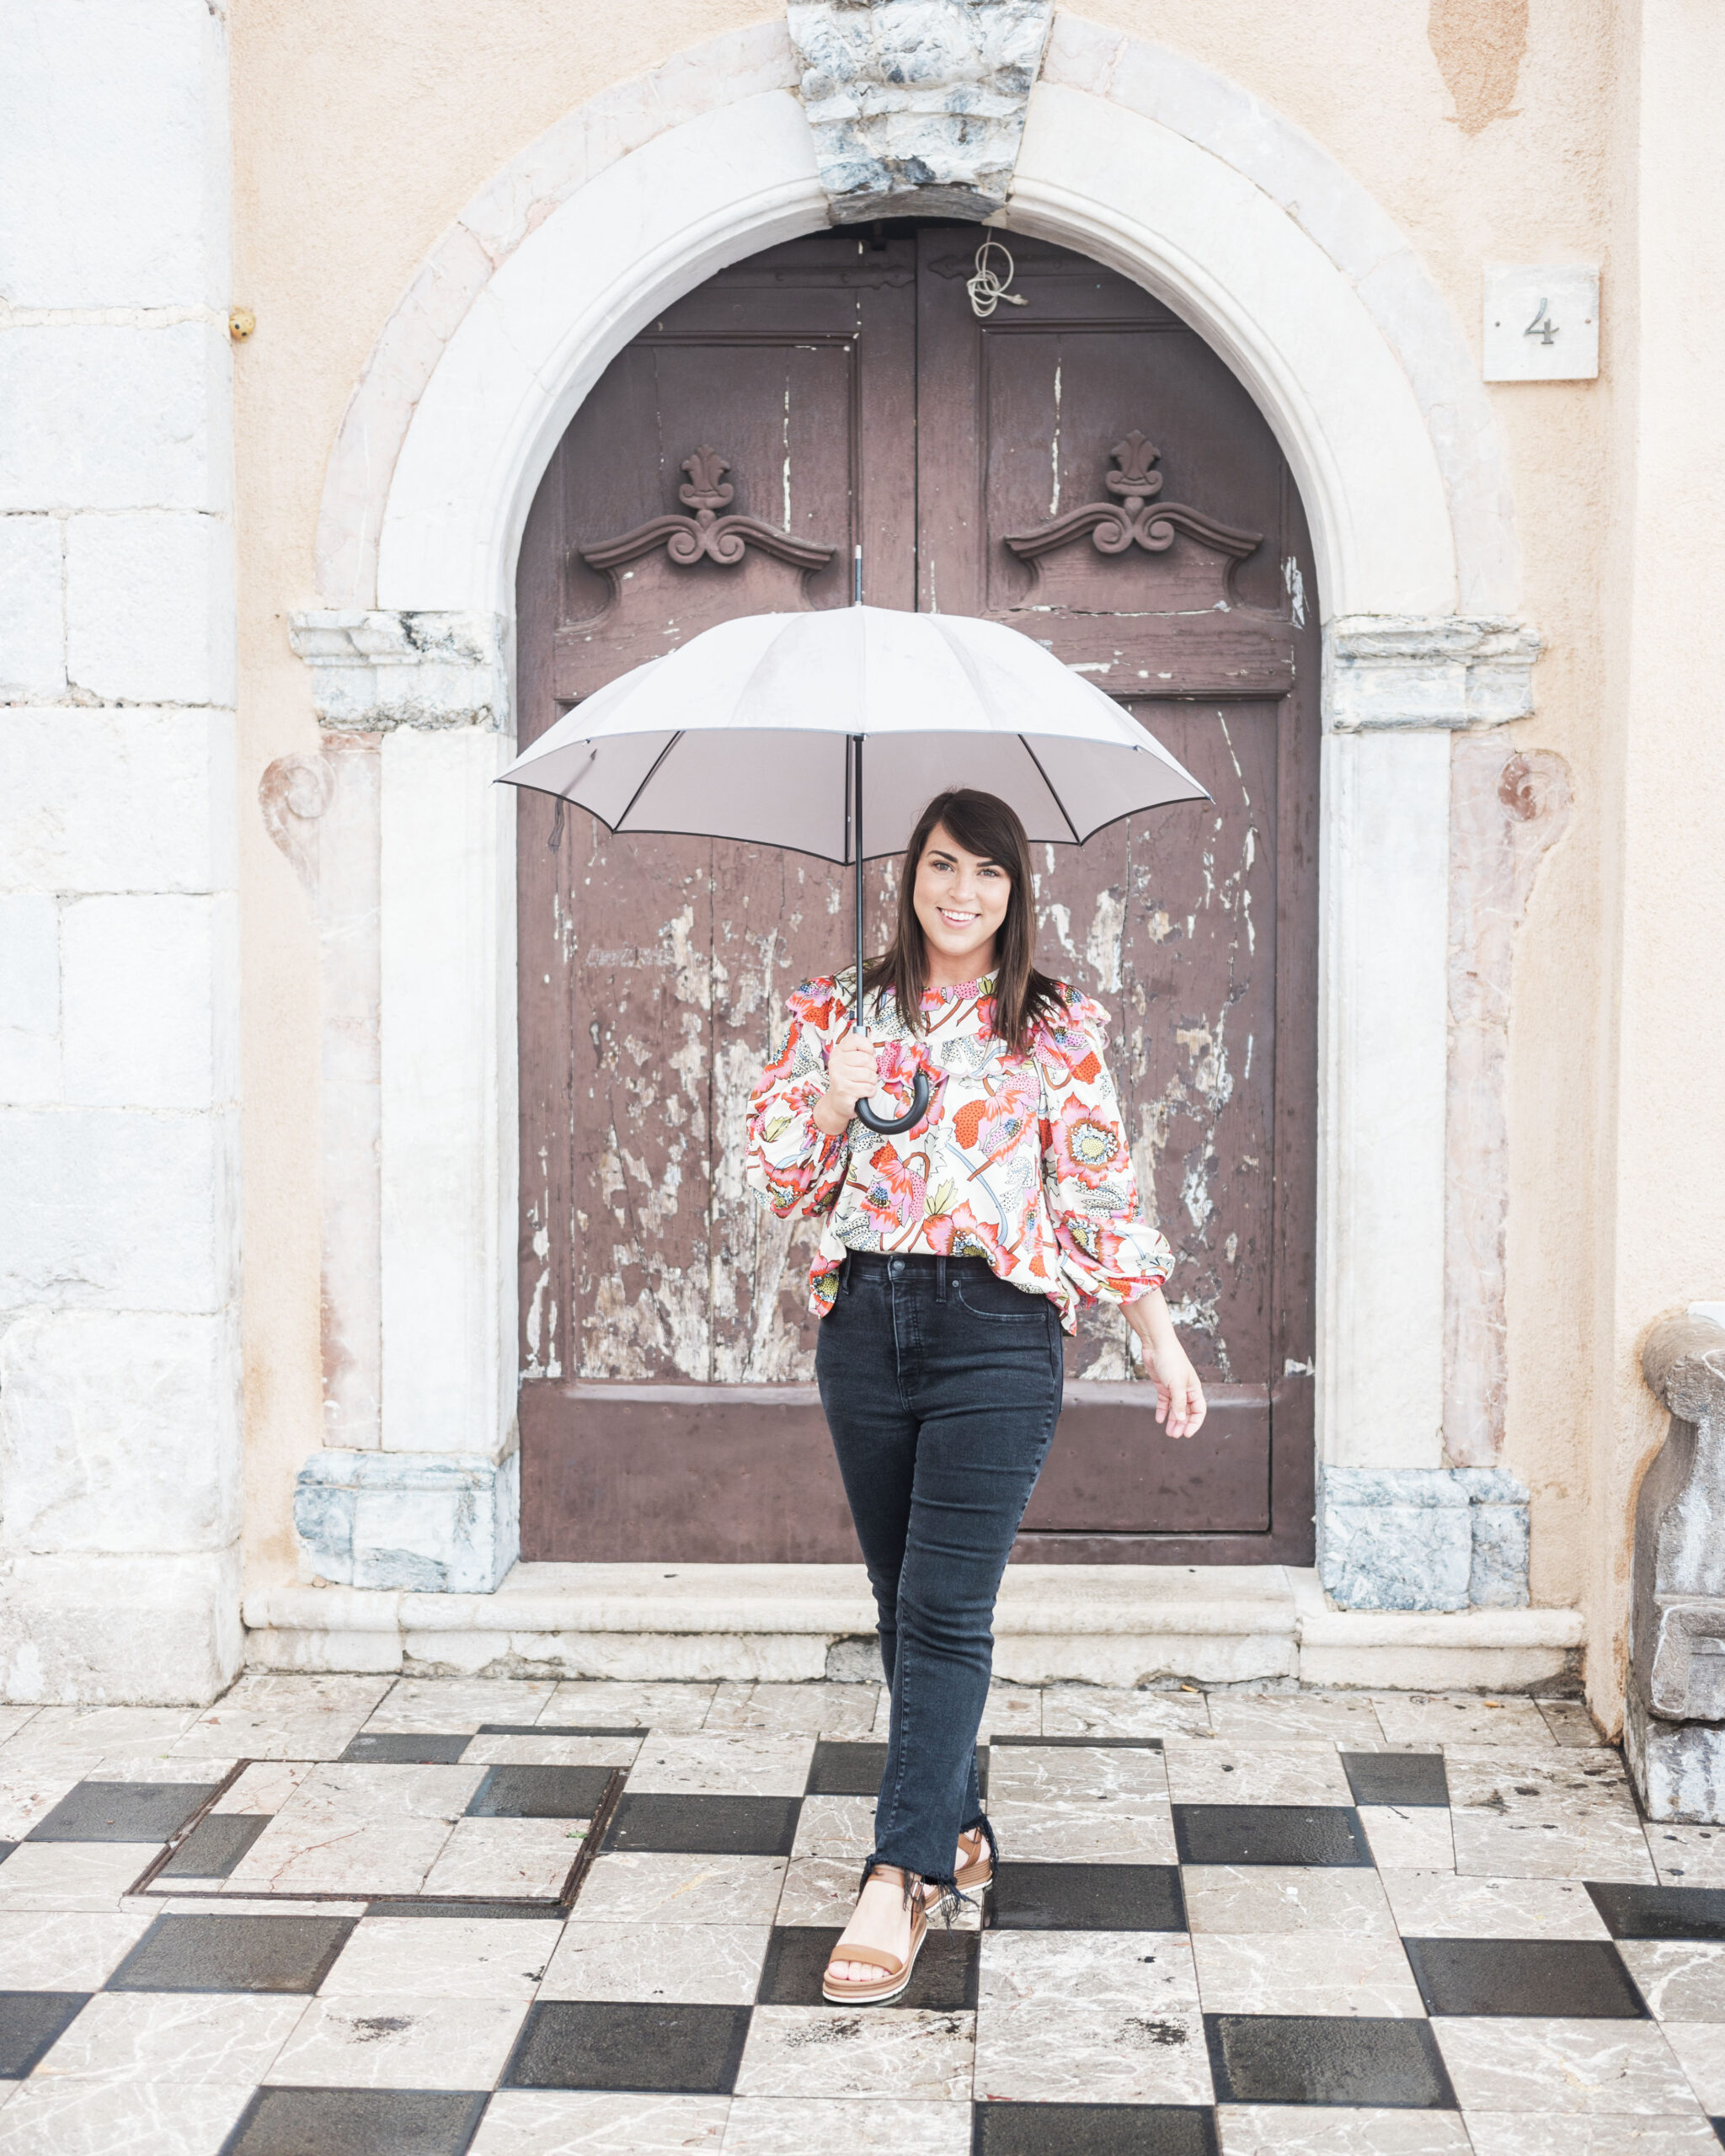 Brittney Naylor holding umbrella, standing in front of old building in Taormina, Sicily